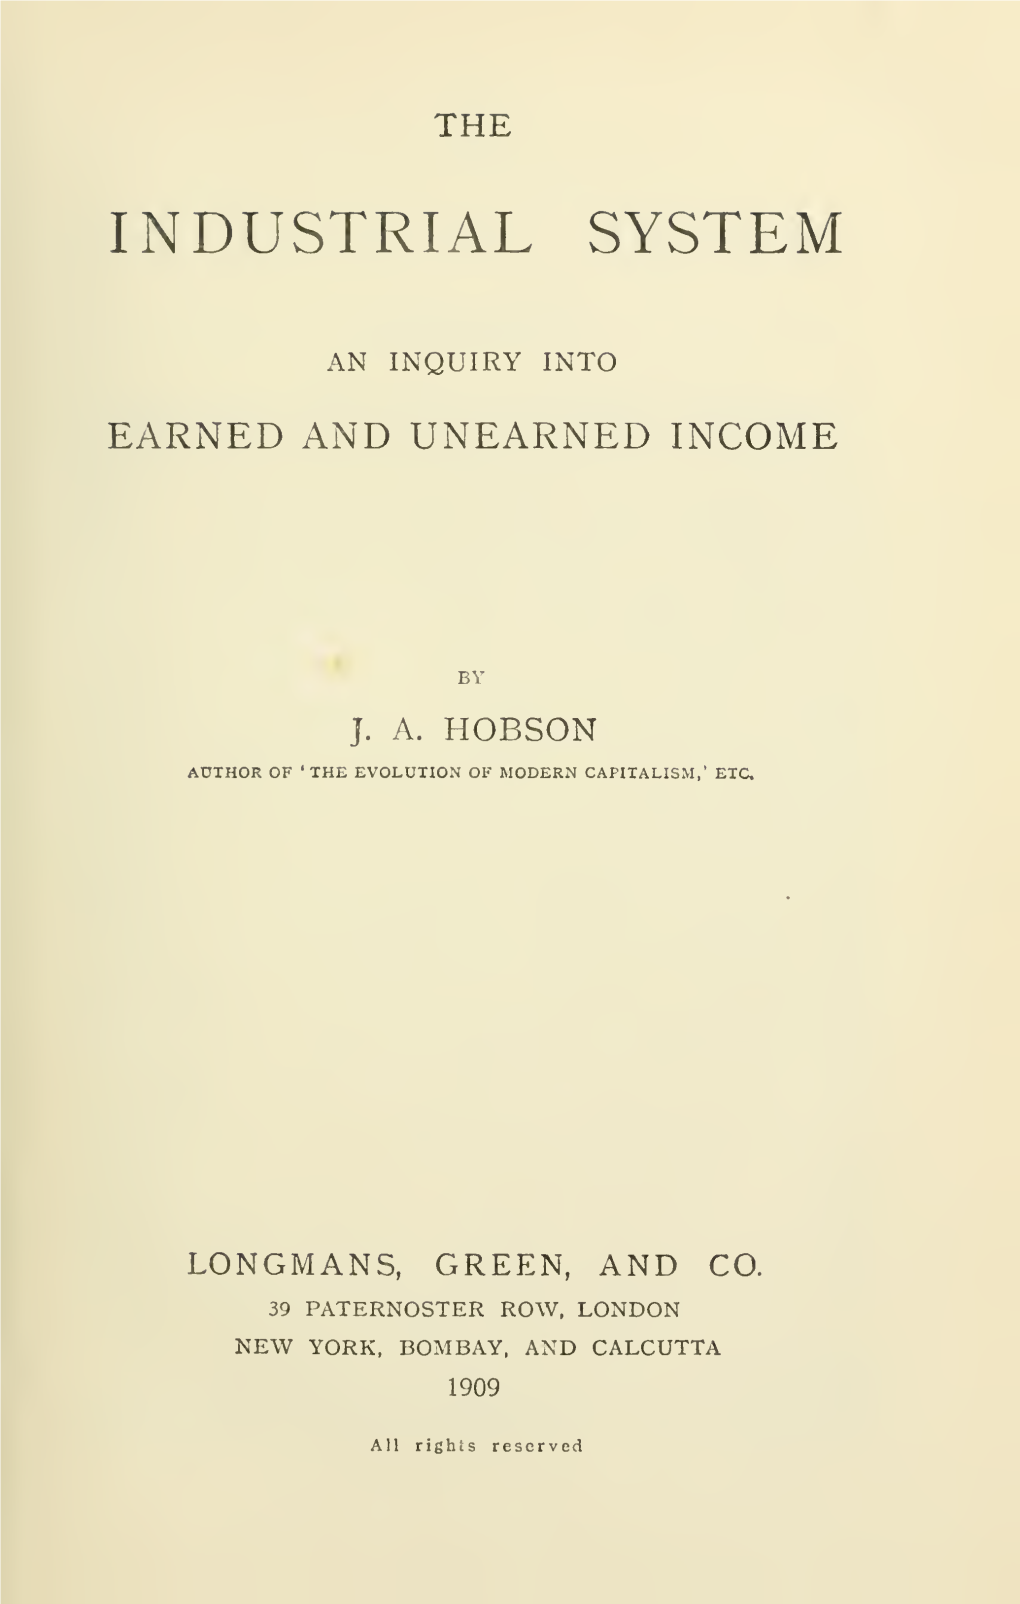 The Industrial System, an Inquiry Into Earned and Unearned Income